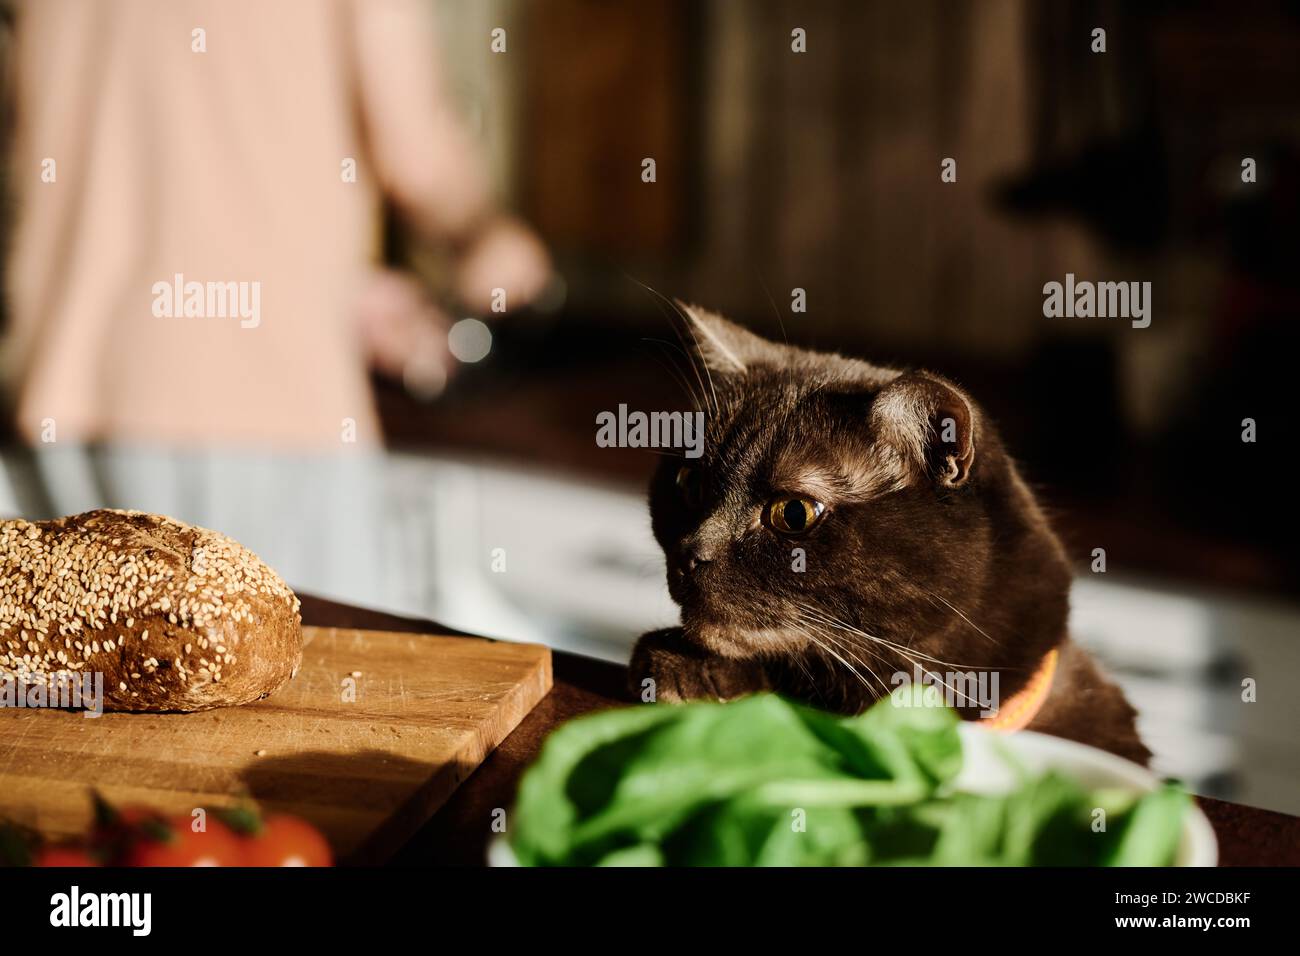 Cute purebred cat standing by kitchen table and looking at fresh homemade bread on wooden board in front of camera Stock Photo